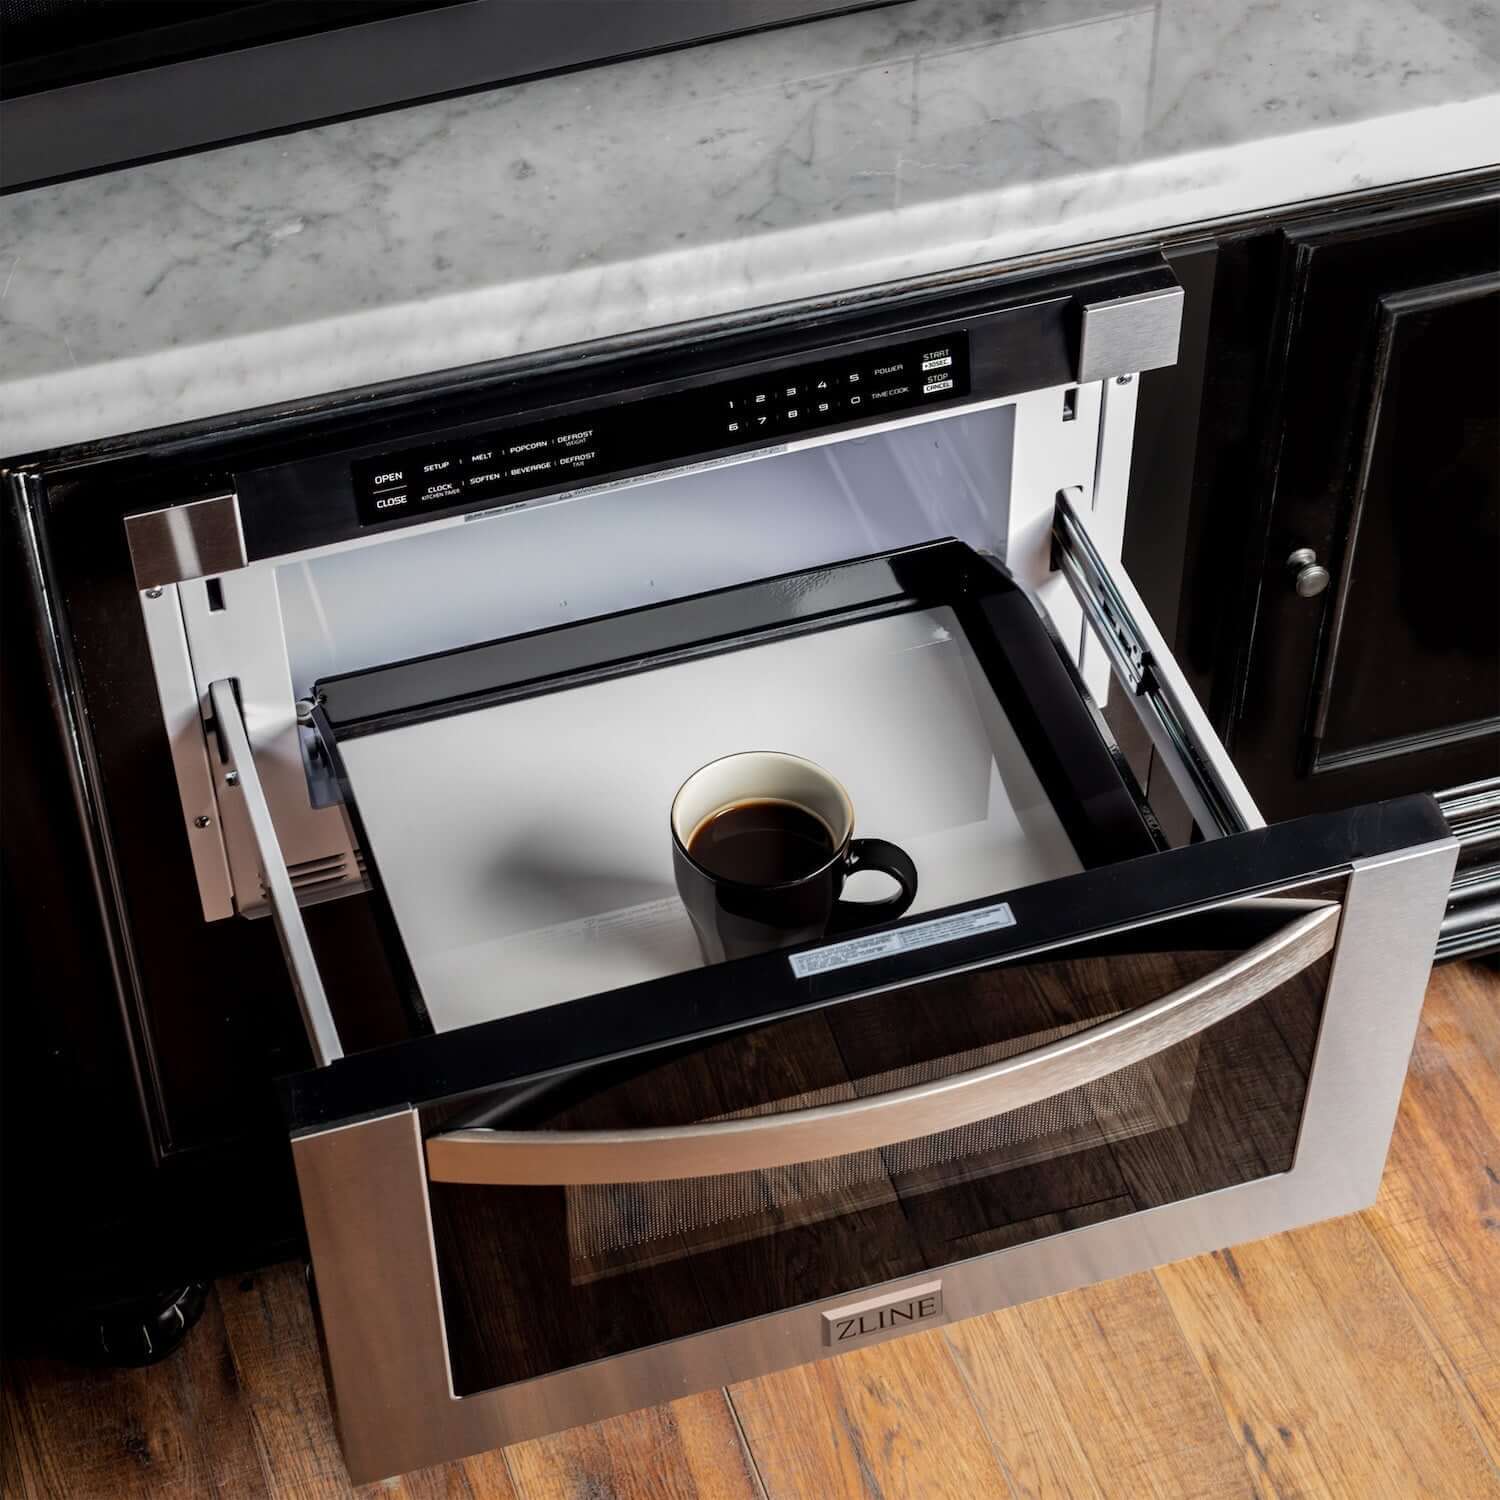 Cup of coffee inside ZLINE 24" Built-in Microwave Drawer from above.